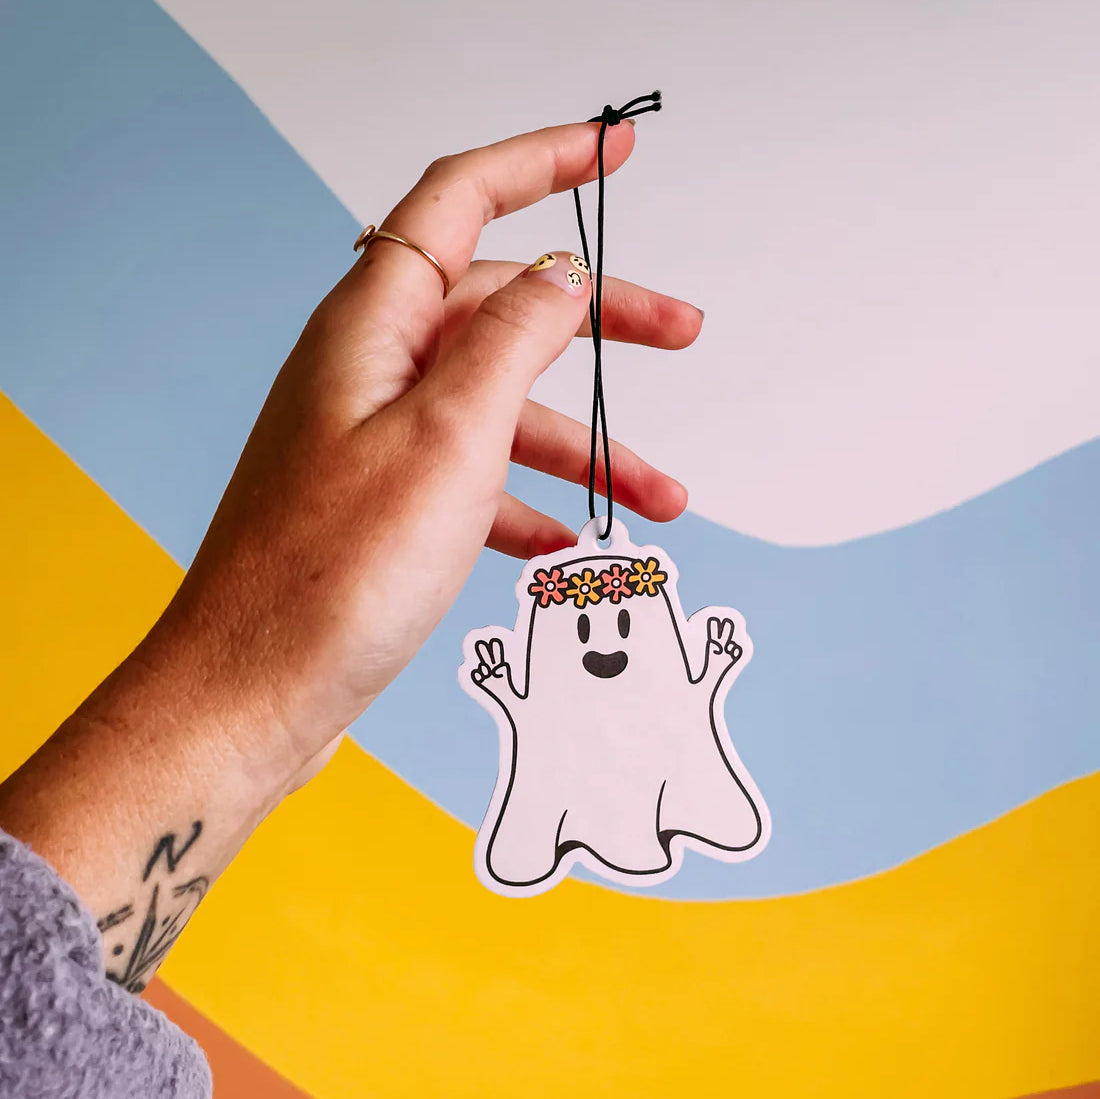 A hand holds up a car air freshener in a ghost design